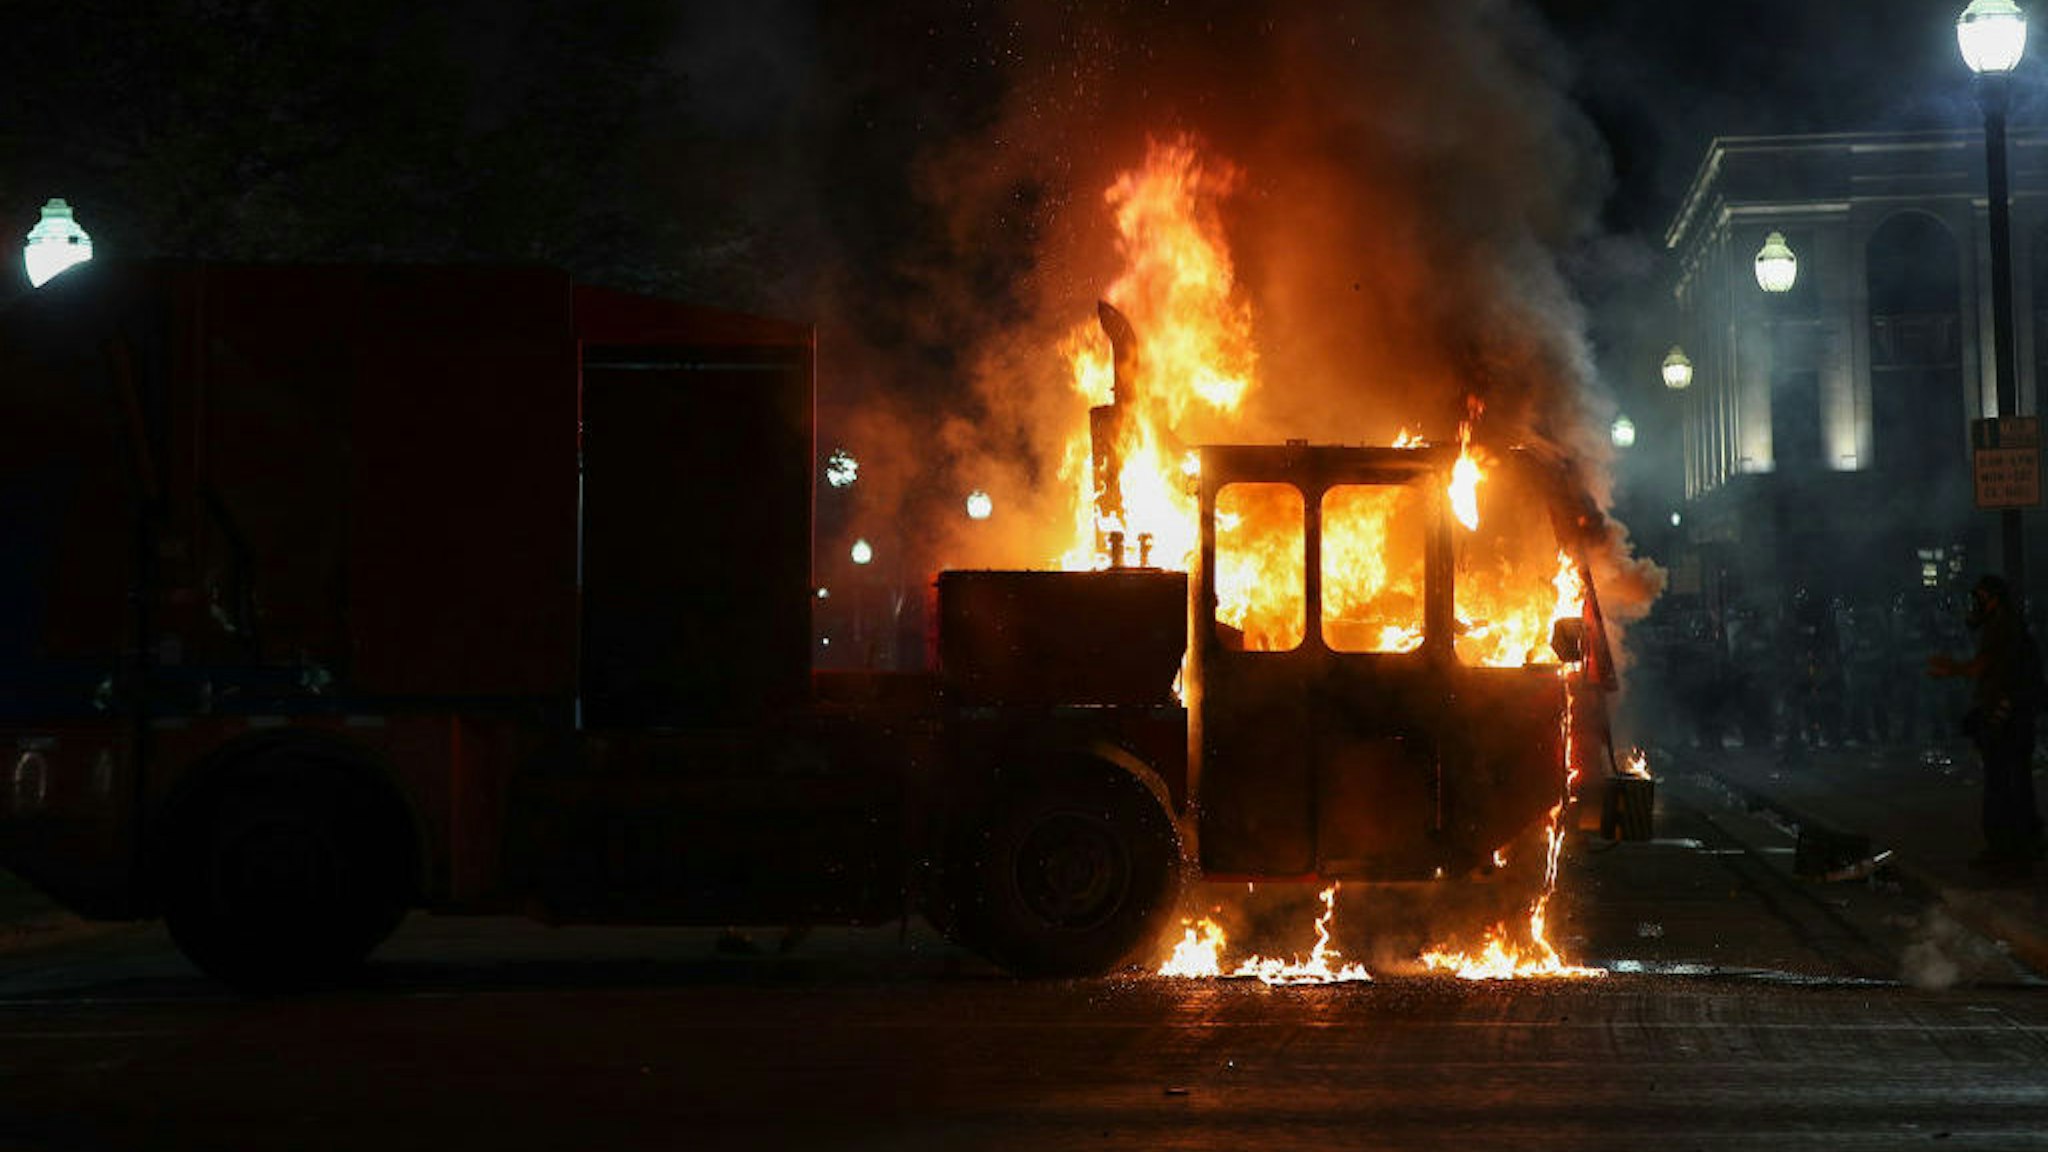 Jacob Blake protesters lit cleaning truck on fire in Kenosha, Wisconsin, United States on August 24, 2020. A police shooting in the US state of Wisconsin sent a Black man into serious condition on Sunday, with the video footage of the incident triggering outrage. (Photo by Tayfun Coskun/Anadolu Agency via Getty Images)